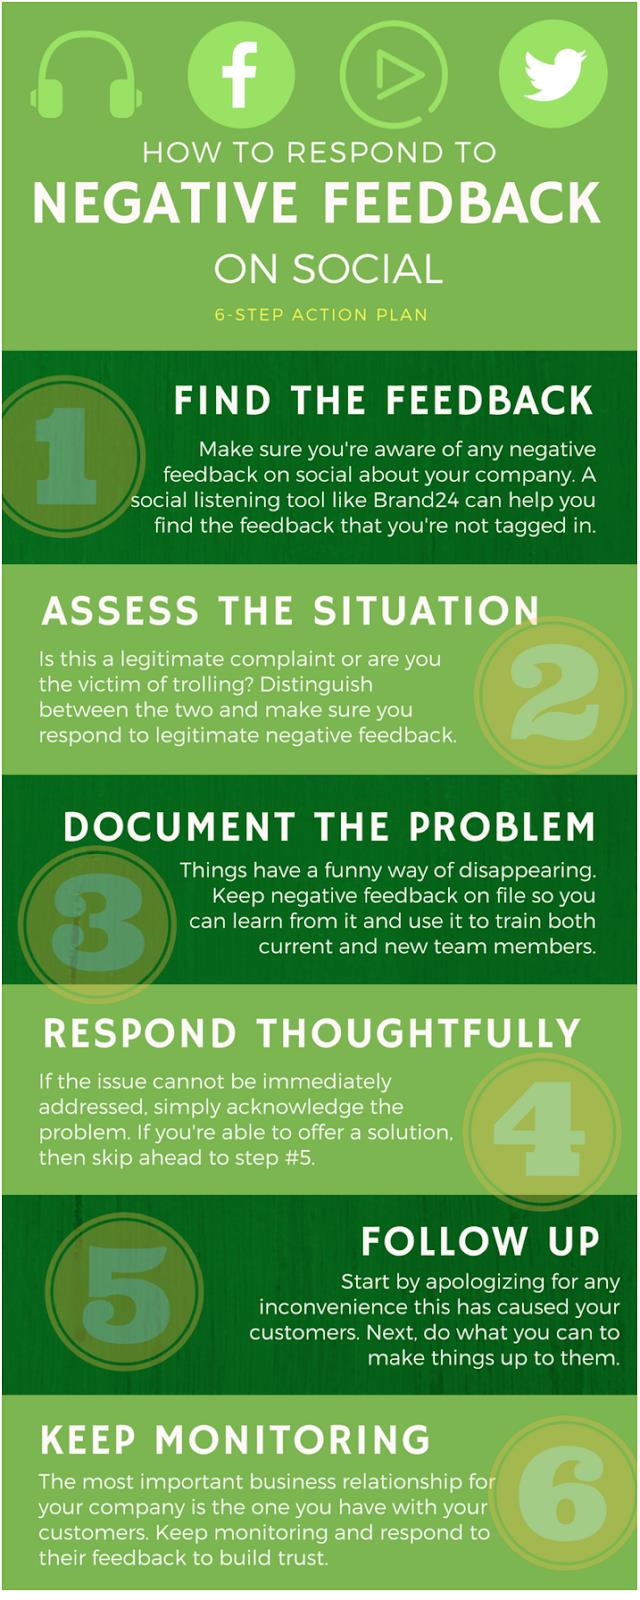 How to Respond to Negative Feedback on Social